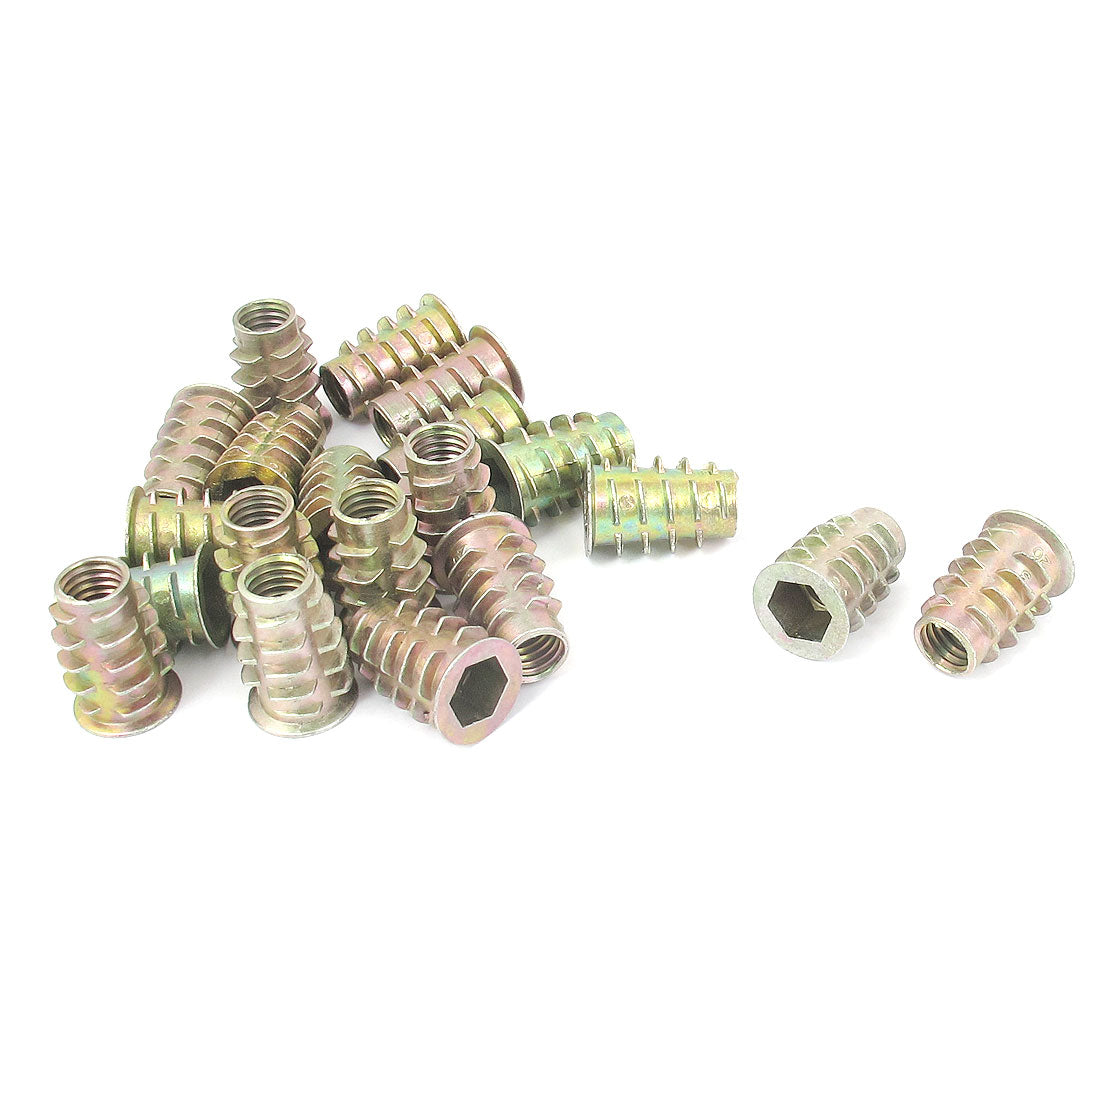 uxcell Uxcell 20 Pcs M8x20mm Zinc Plated Hex Socket Screw in Thread Insert Nut for Wood